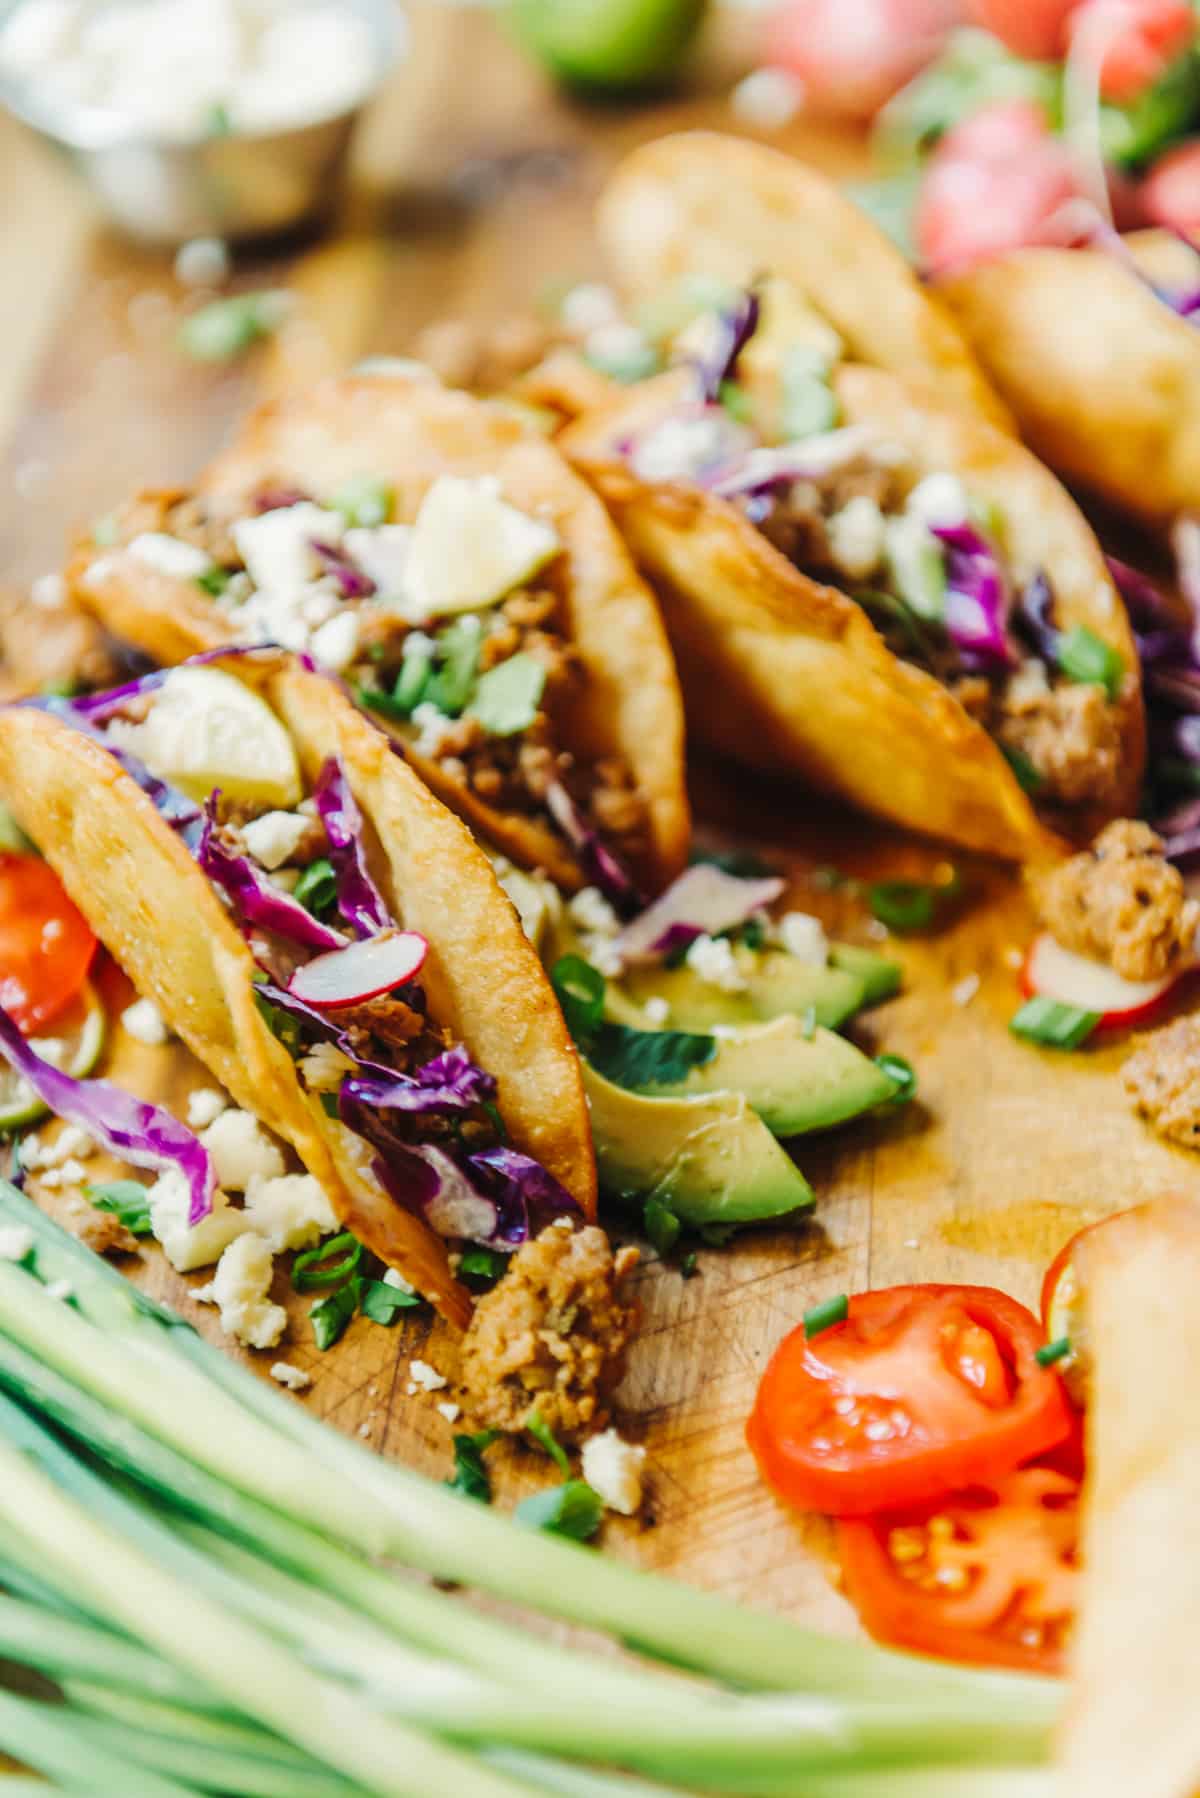 crispy fried tacos filled with ground pork and fresh veggies